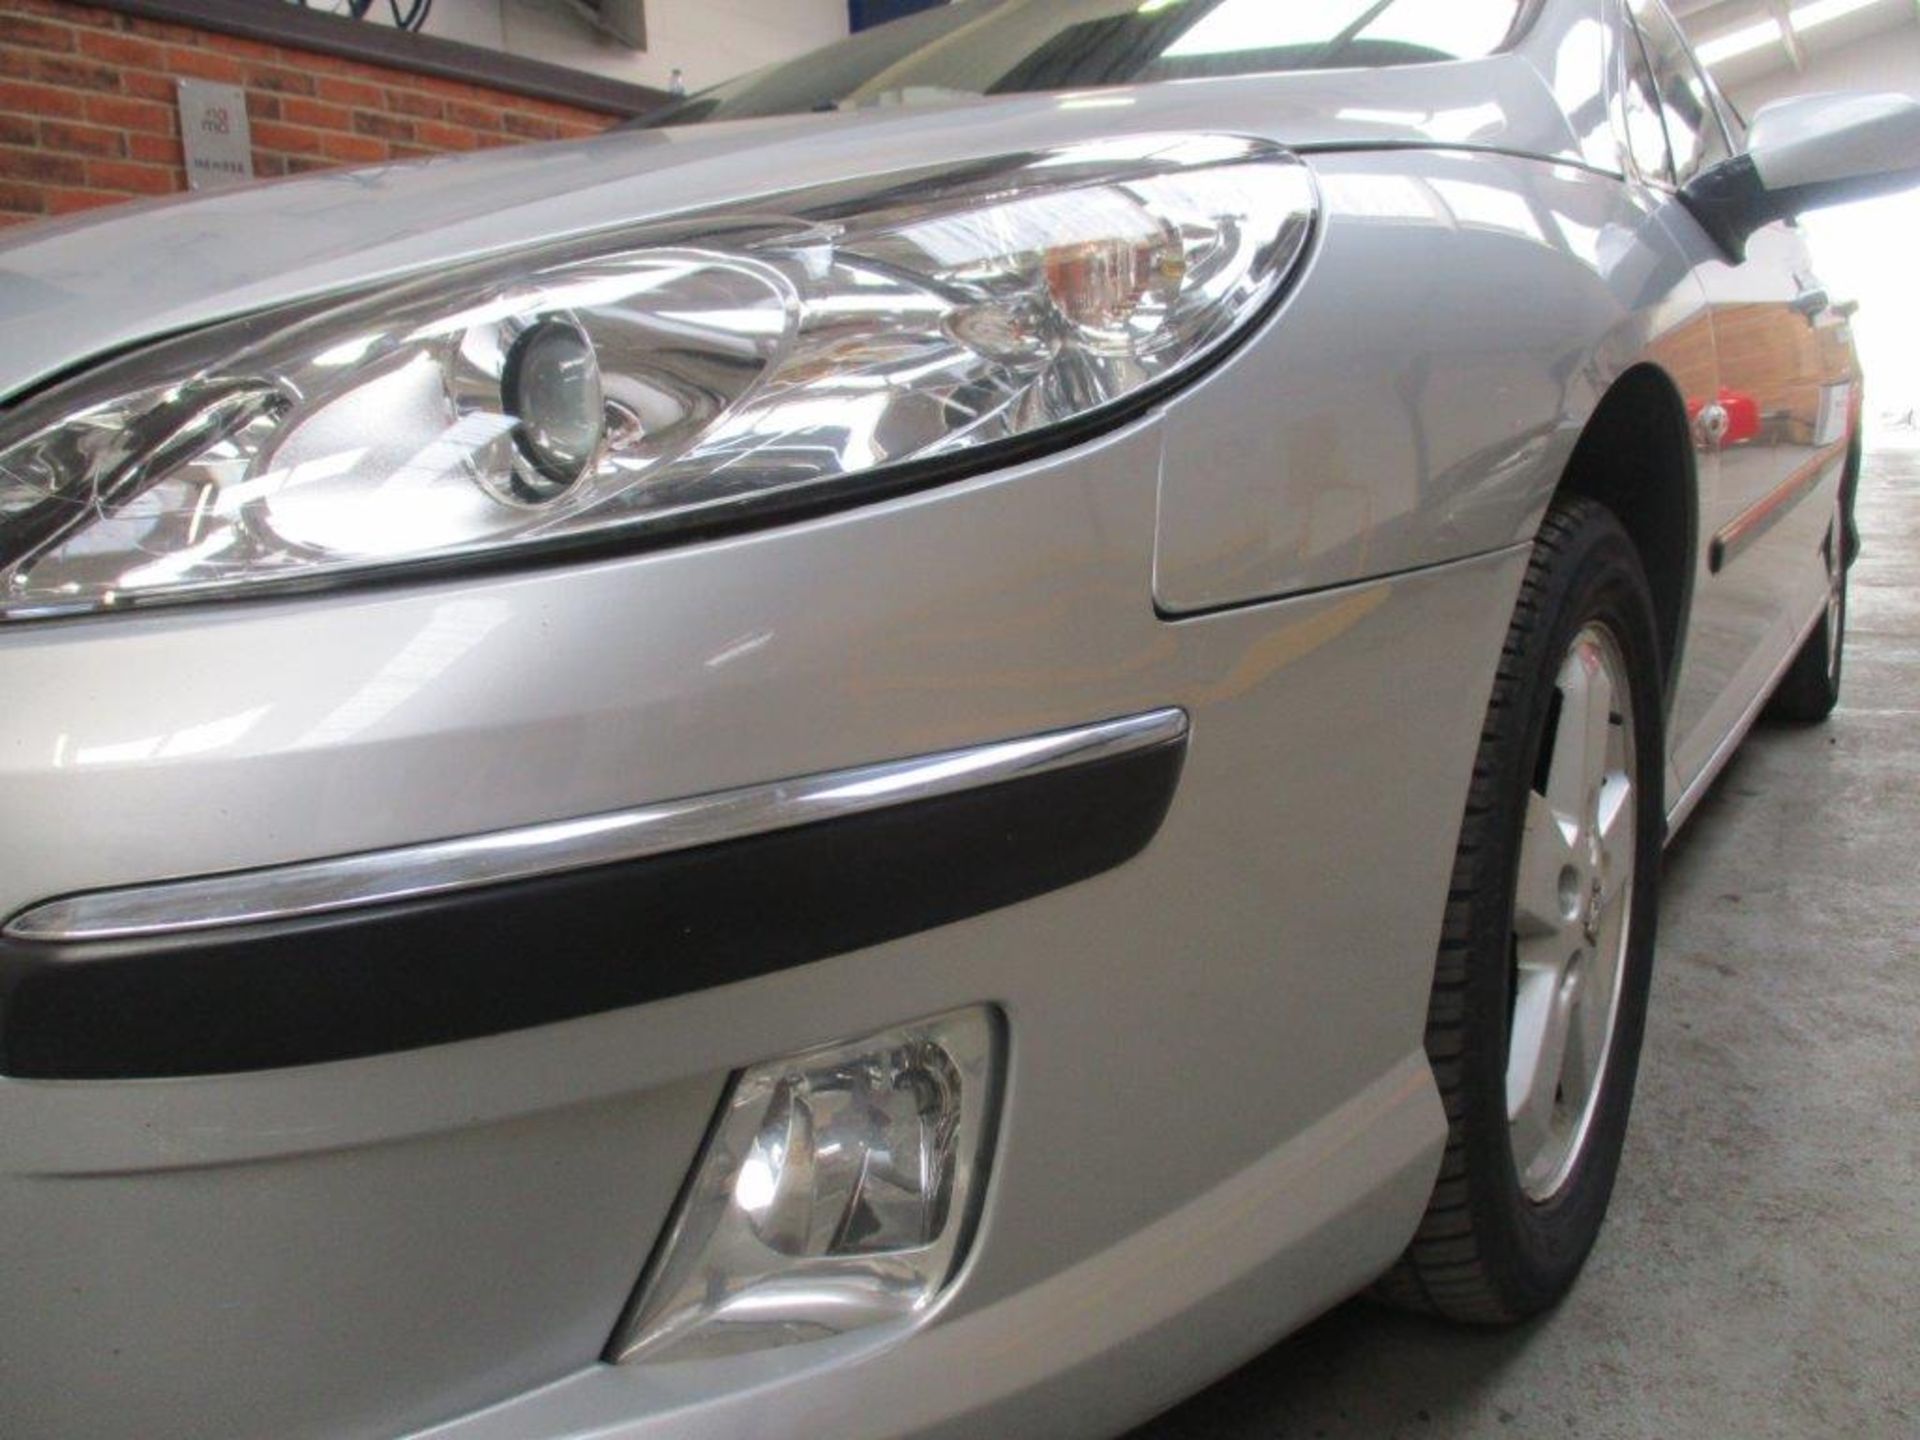 09 09 Peugeot 407 SW - Image 11 of 22